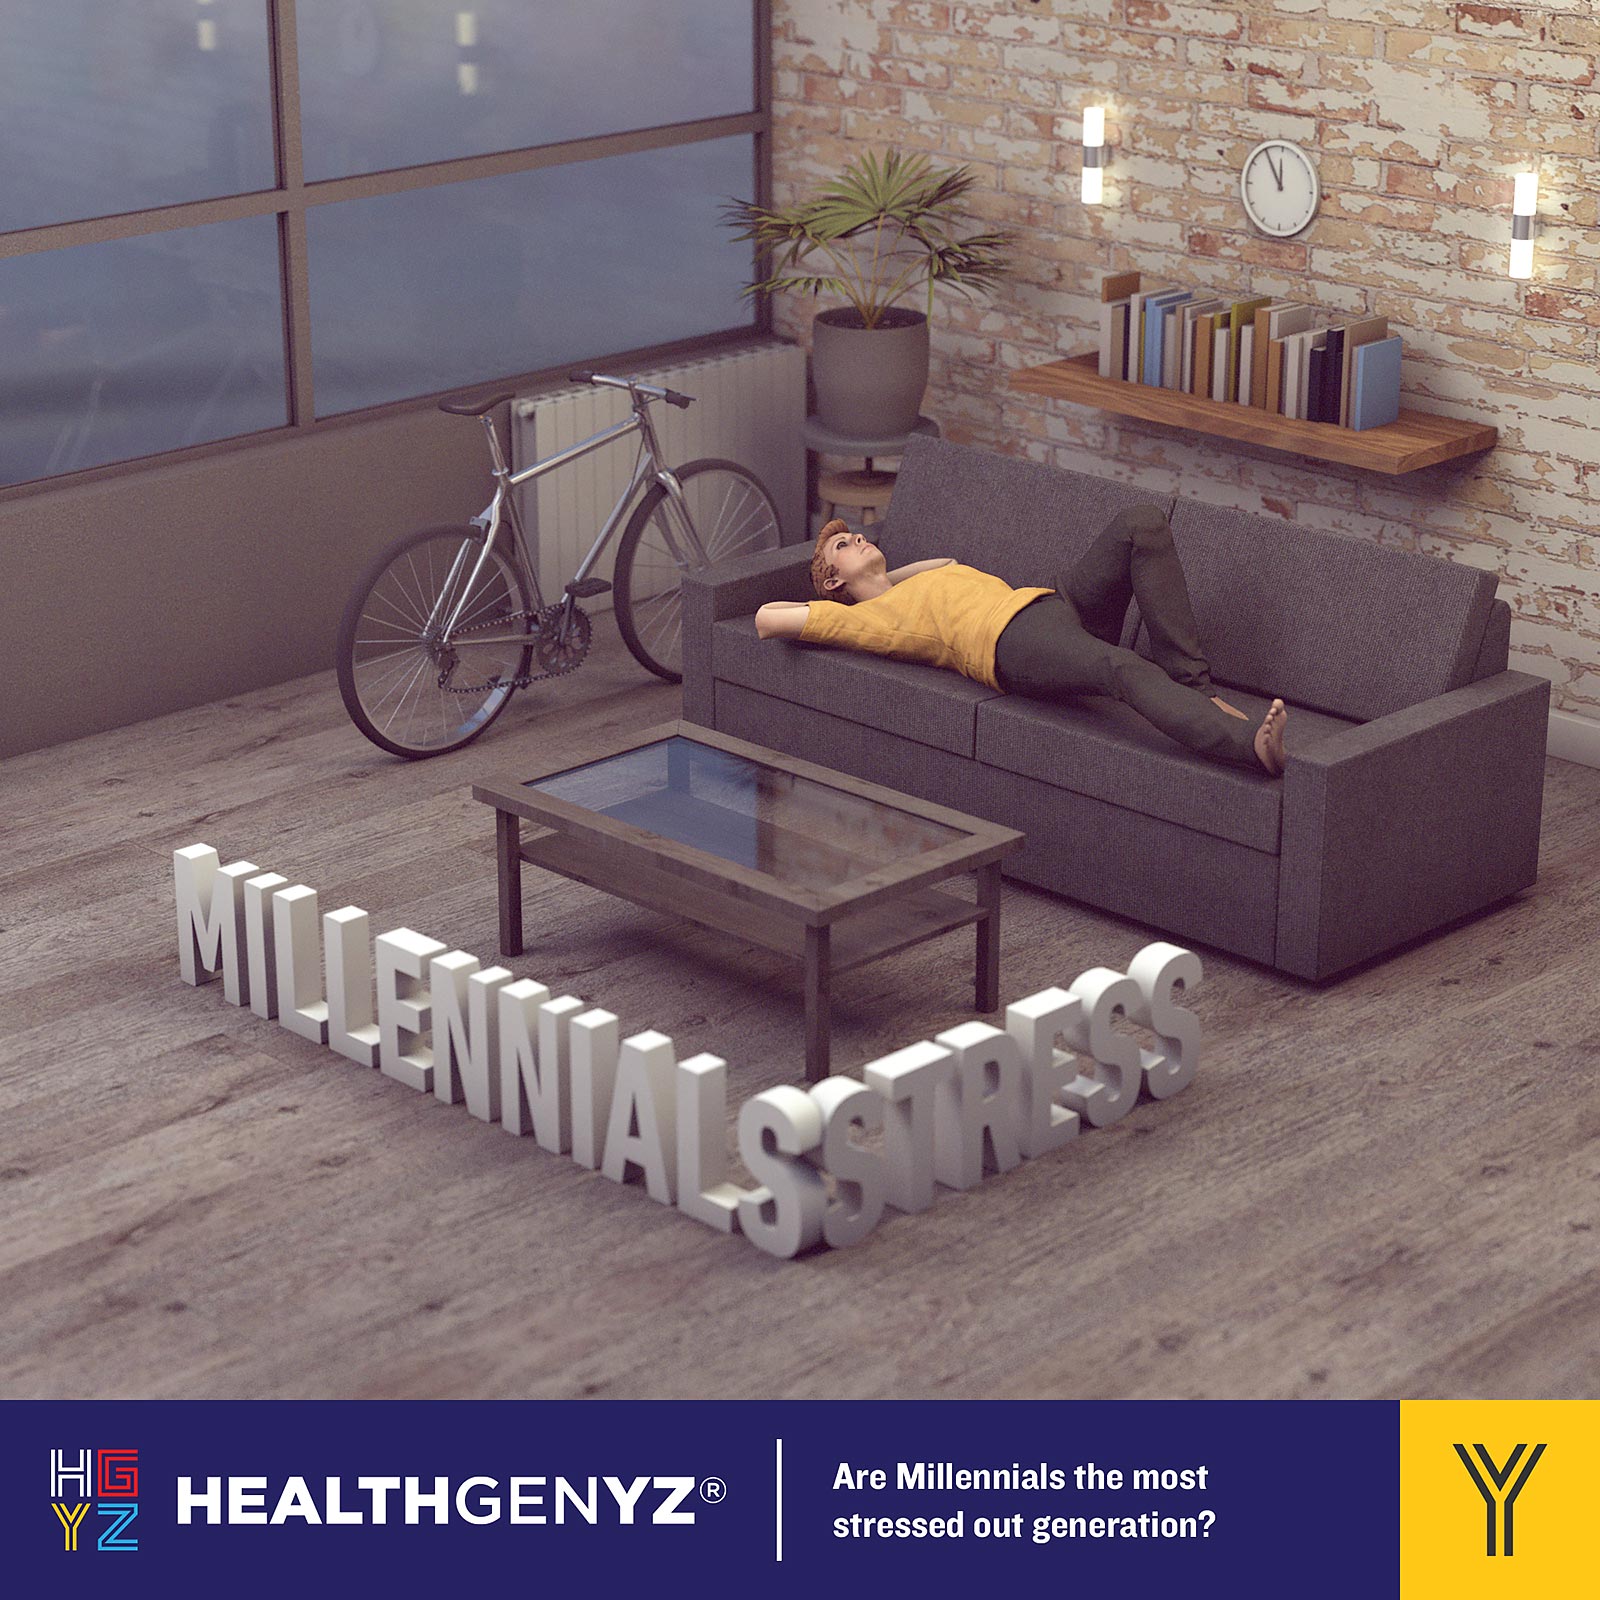 HealthGenYZ category content; a 3D model of a person laying down on a couch in an apartment, with a glass coffee table, a wall-mounted bookshelf behind the couch, a bicycle by the arm of the couch, a potted plant in the back corner of the room, and large windows looking out into a cloudy-grey city, with 3D extruded text on a hardwood floor that says, "Millennial Stress".